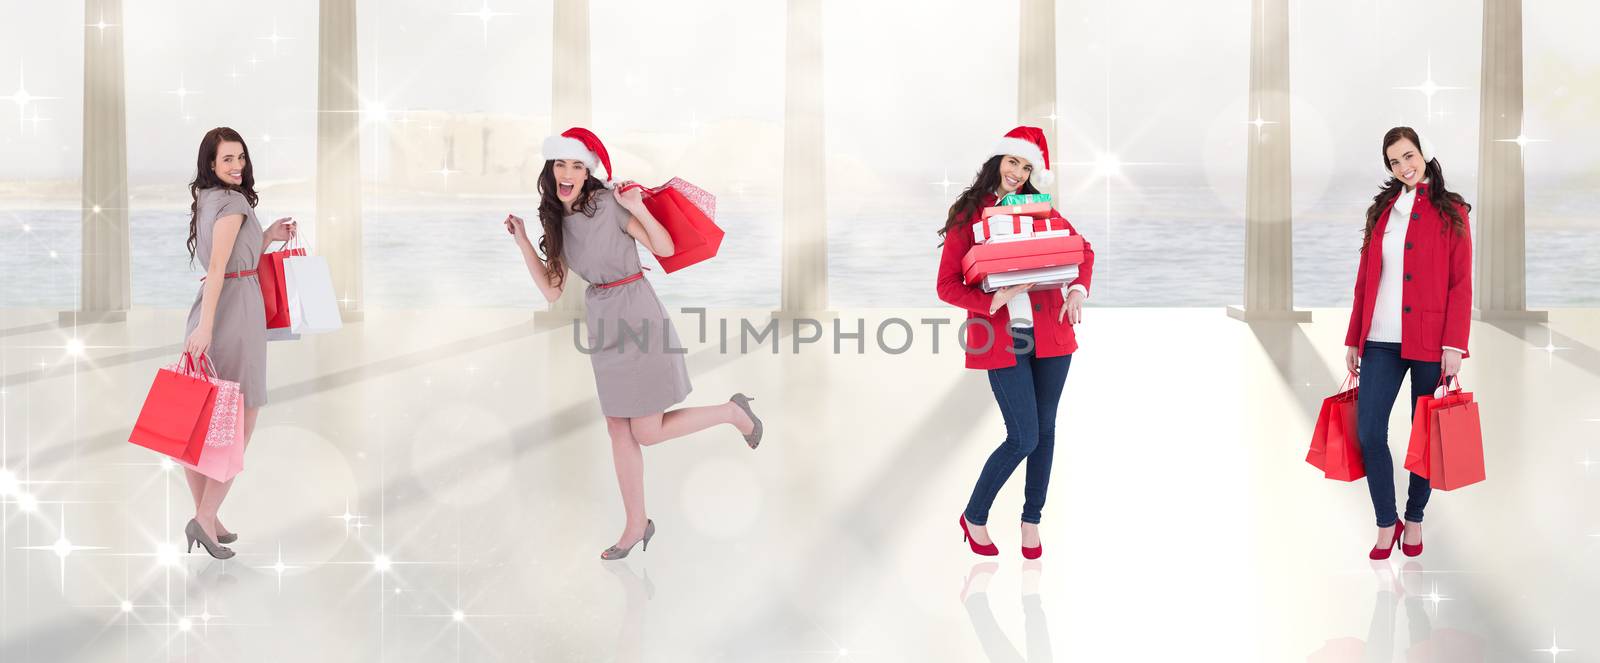 Composite image of different elegant brunettes against twinkling lights over balcony with columns